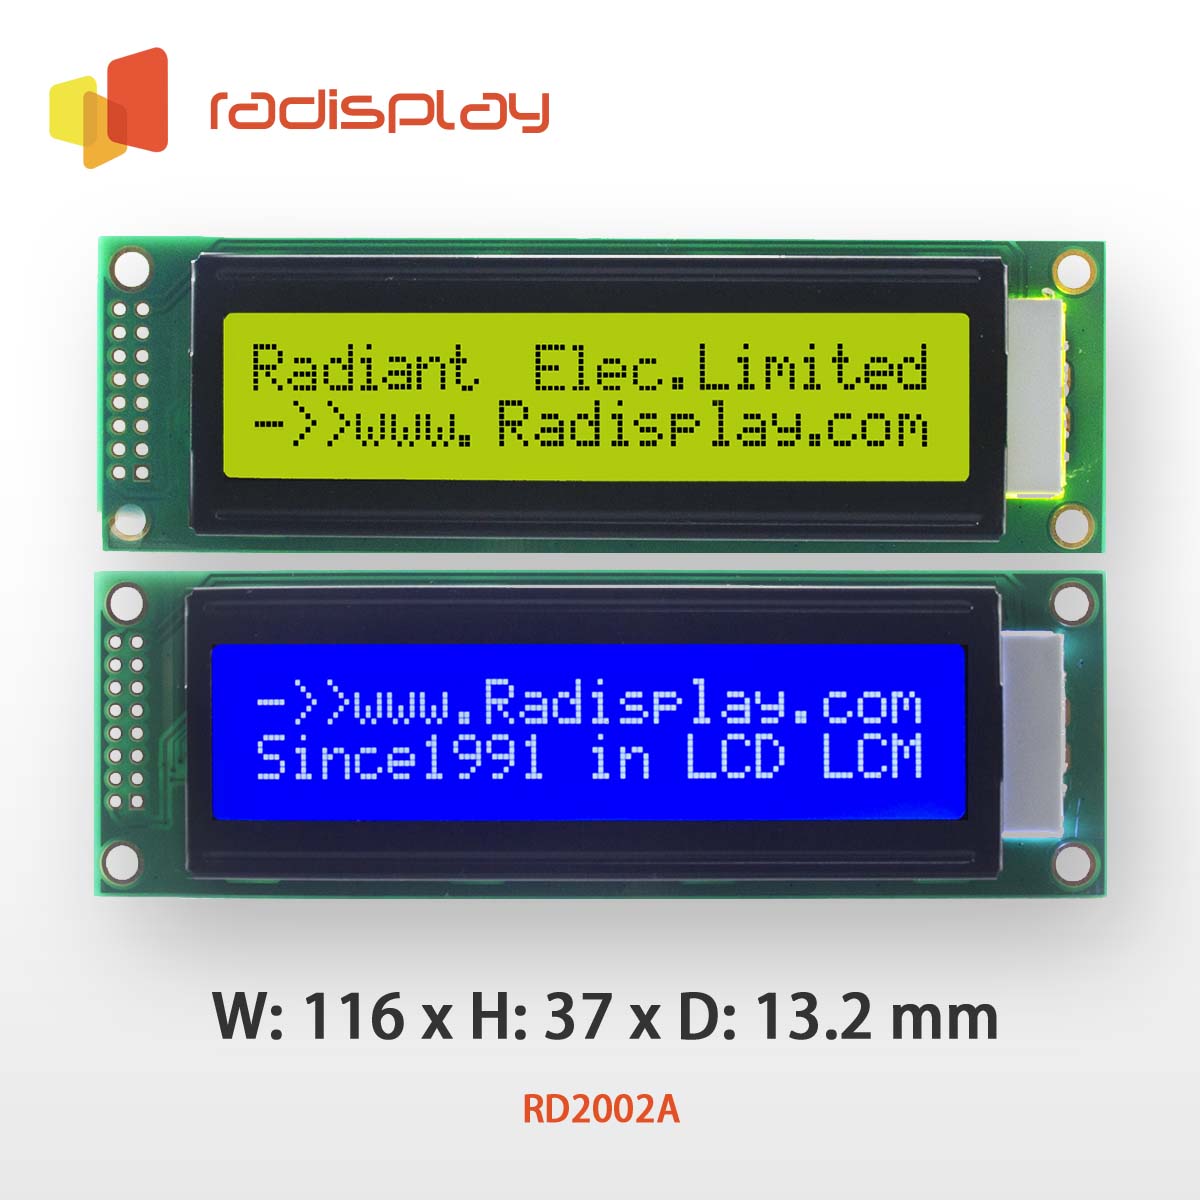 20x2 Character LCD Display Module (RD2002A)